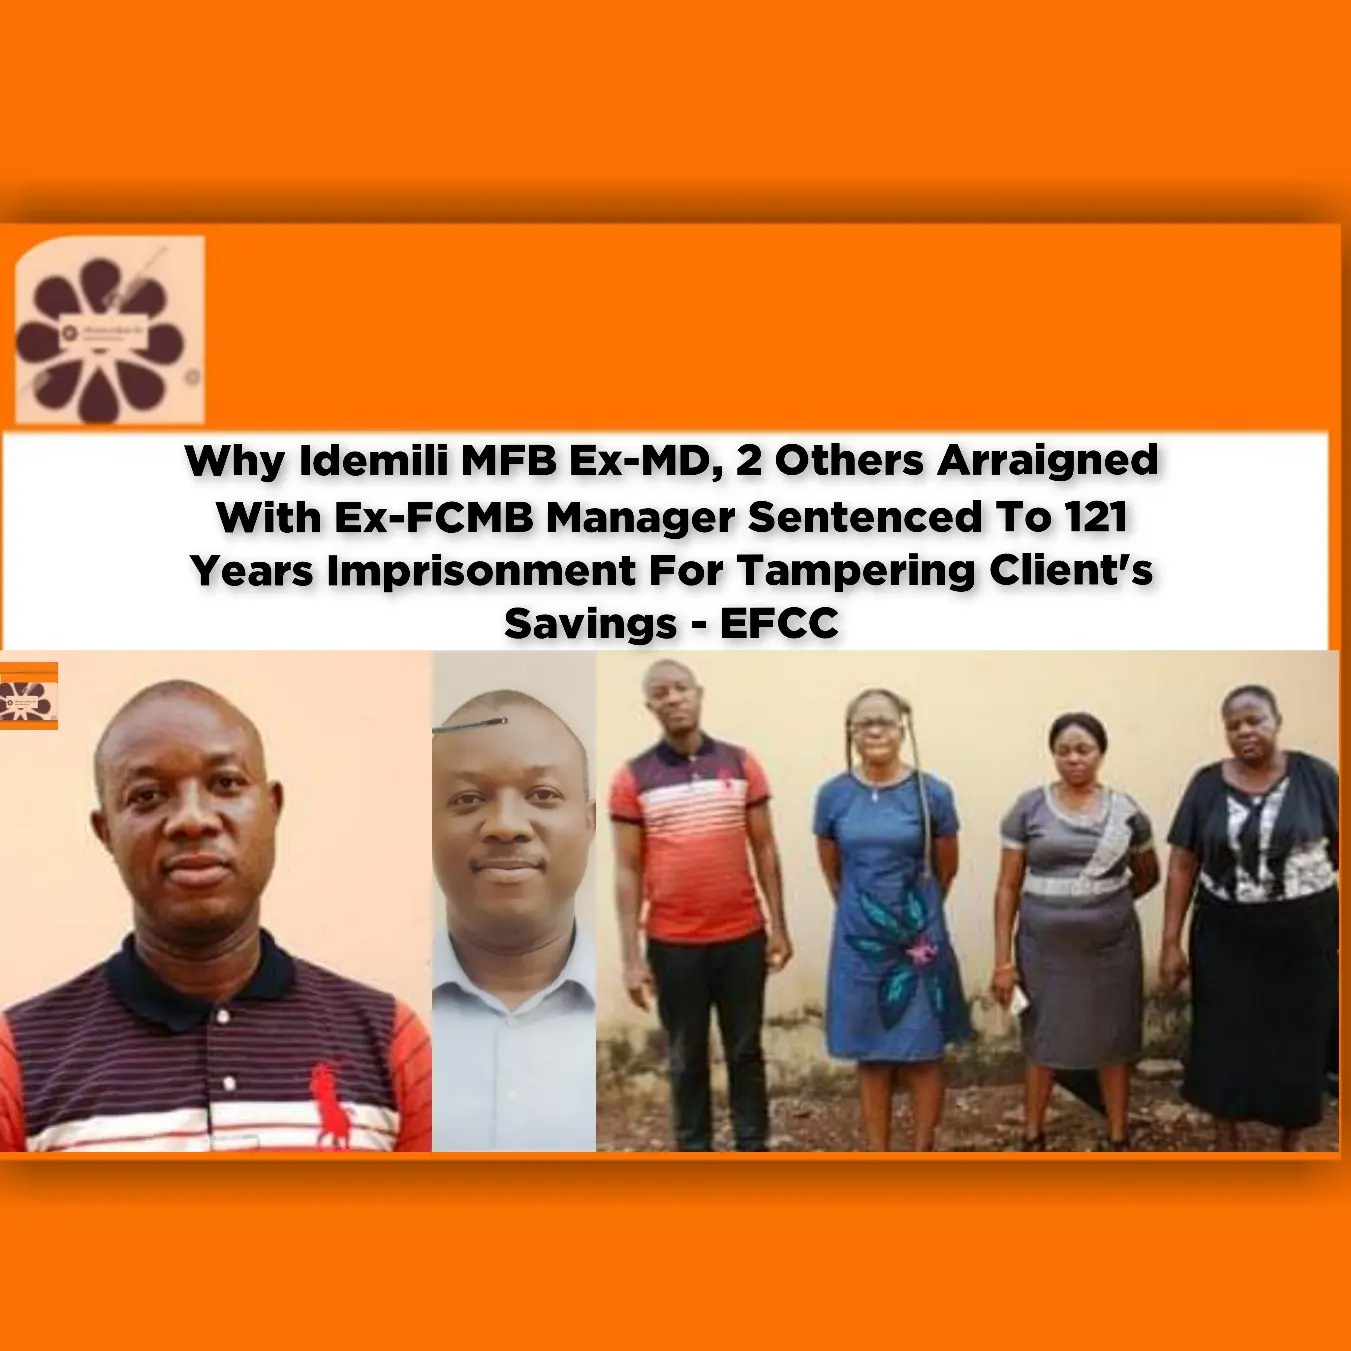 Why Idemili MFB Ex-MD, 2 Others Arraigned With Ex-FCMB Manager Sentenced To 121 Years Imprisonment For Tampering Client's Savings - EFCC ~ OsazuwaAkonedo #America